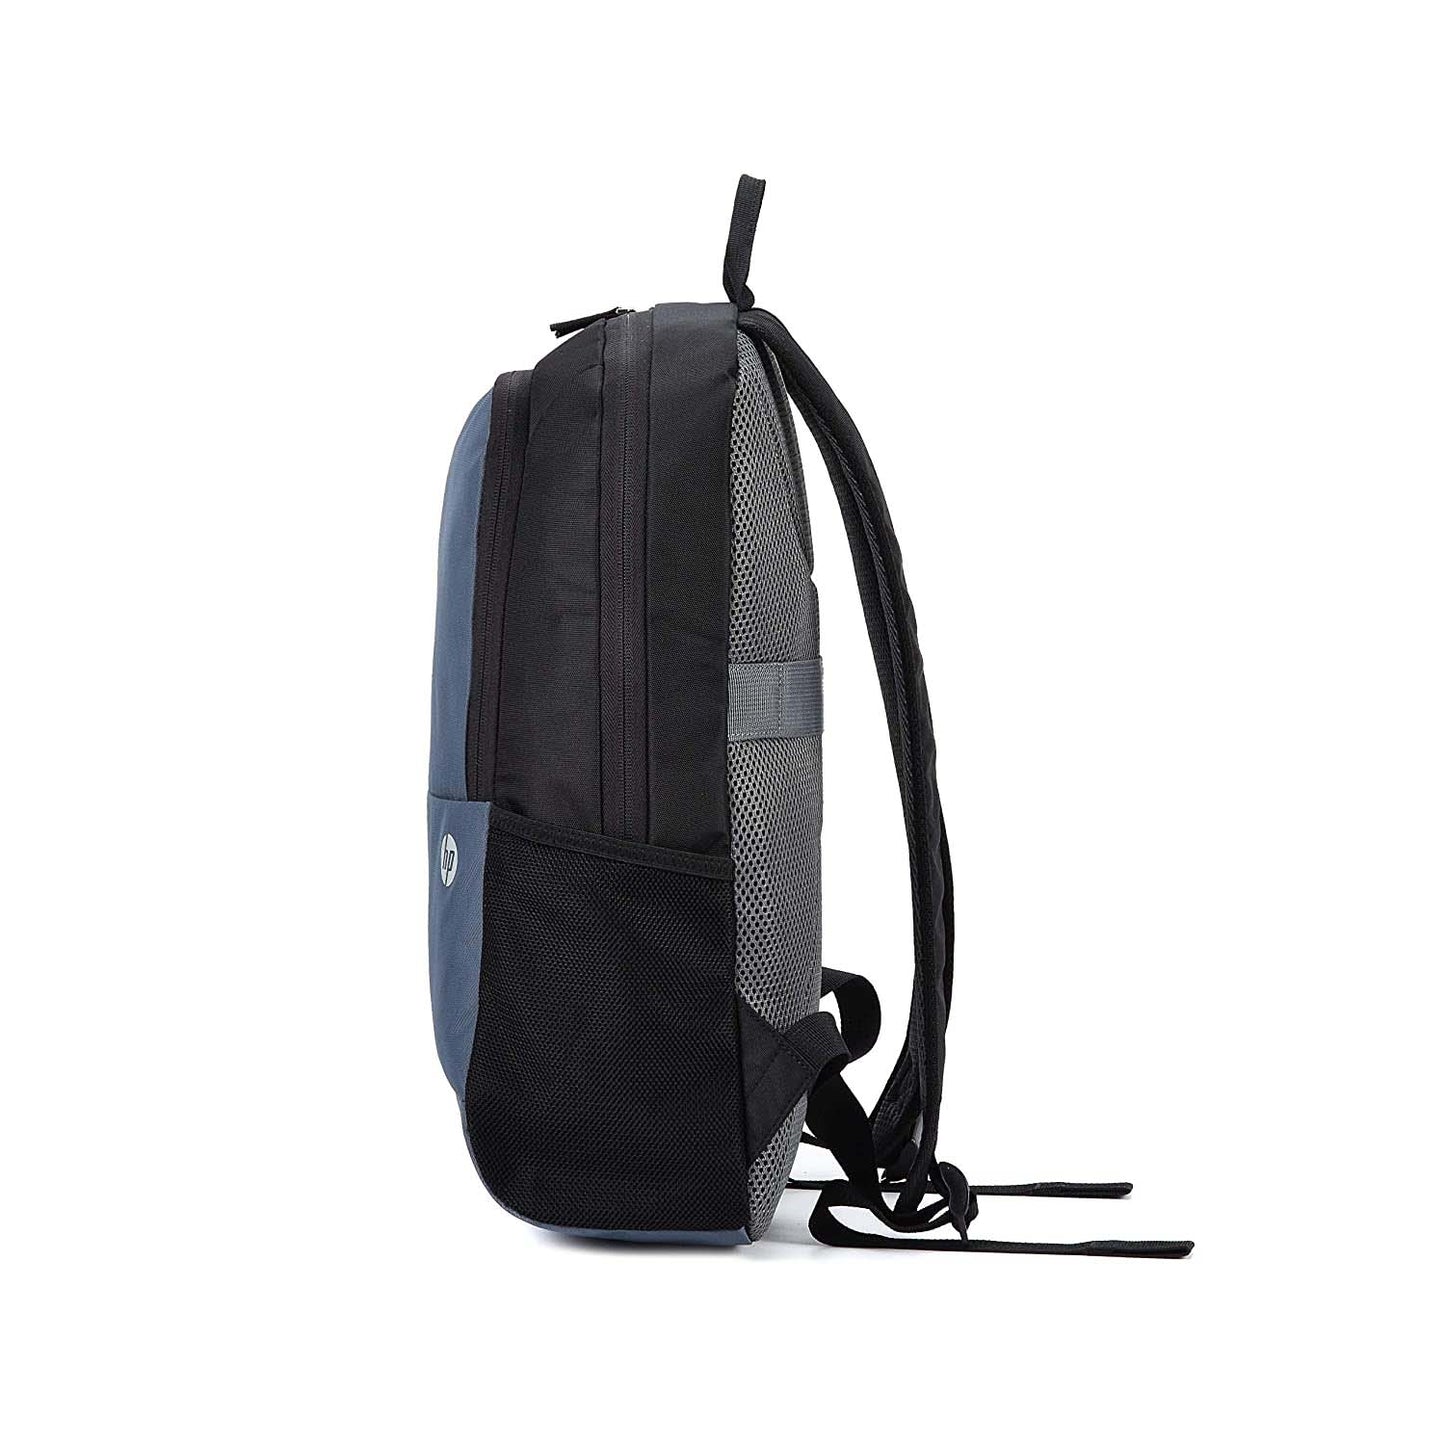 HP 100 Lightweight 15.6-inch Laptop Backpack with Trolley Strap